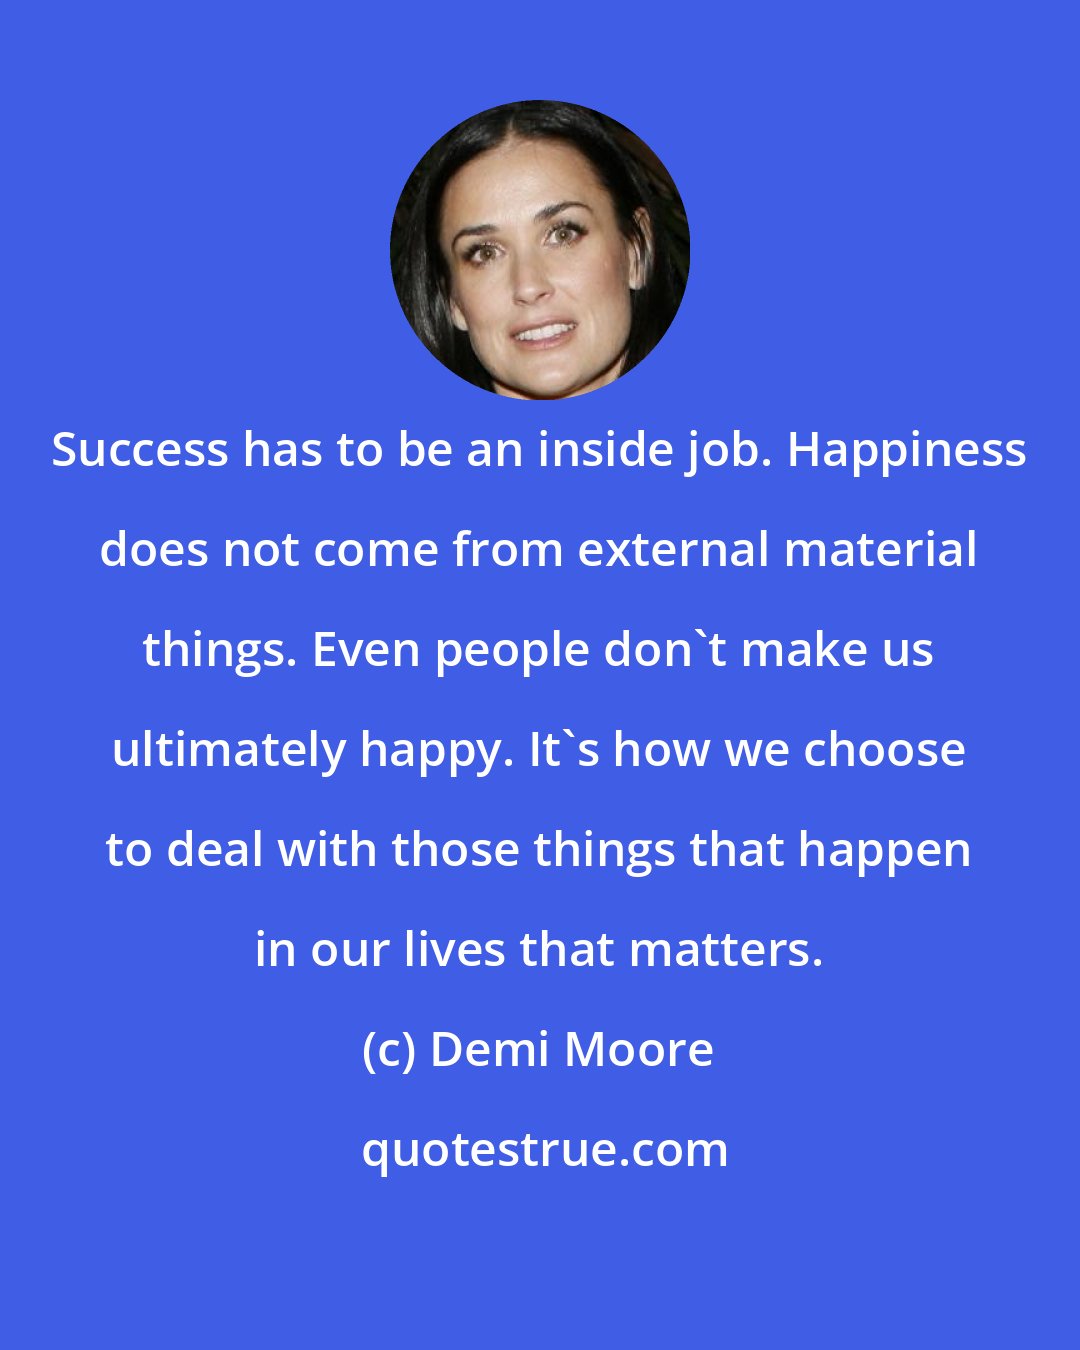 Demi Moore: Success has to be an inside job. Happiness does not come from external material things. Even people don't make us ultimately happy. It's how we choose to deal with those things that happen in our lives that matters.